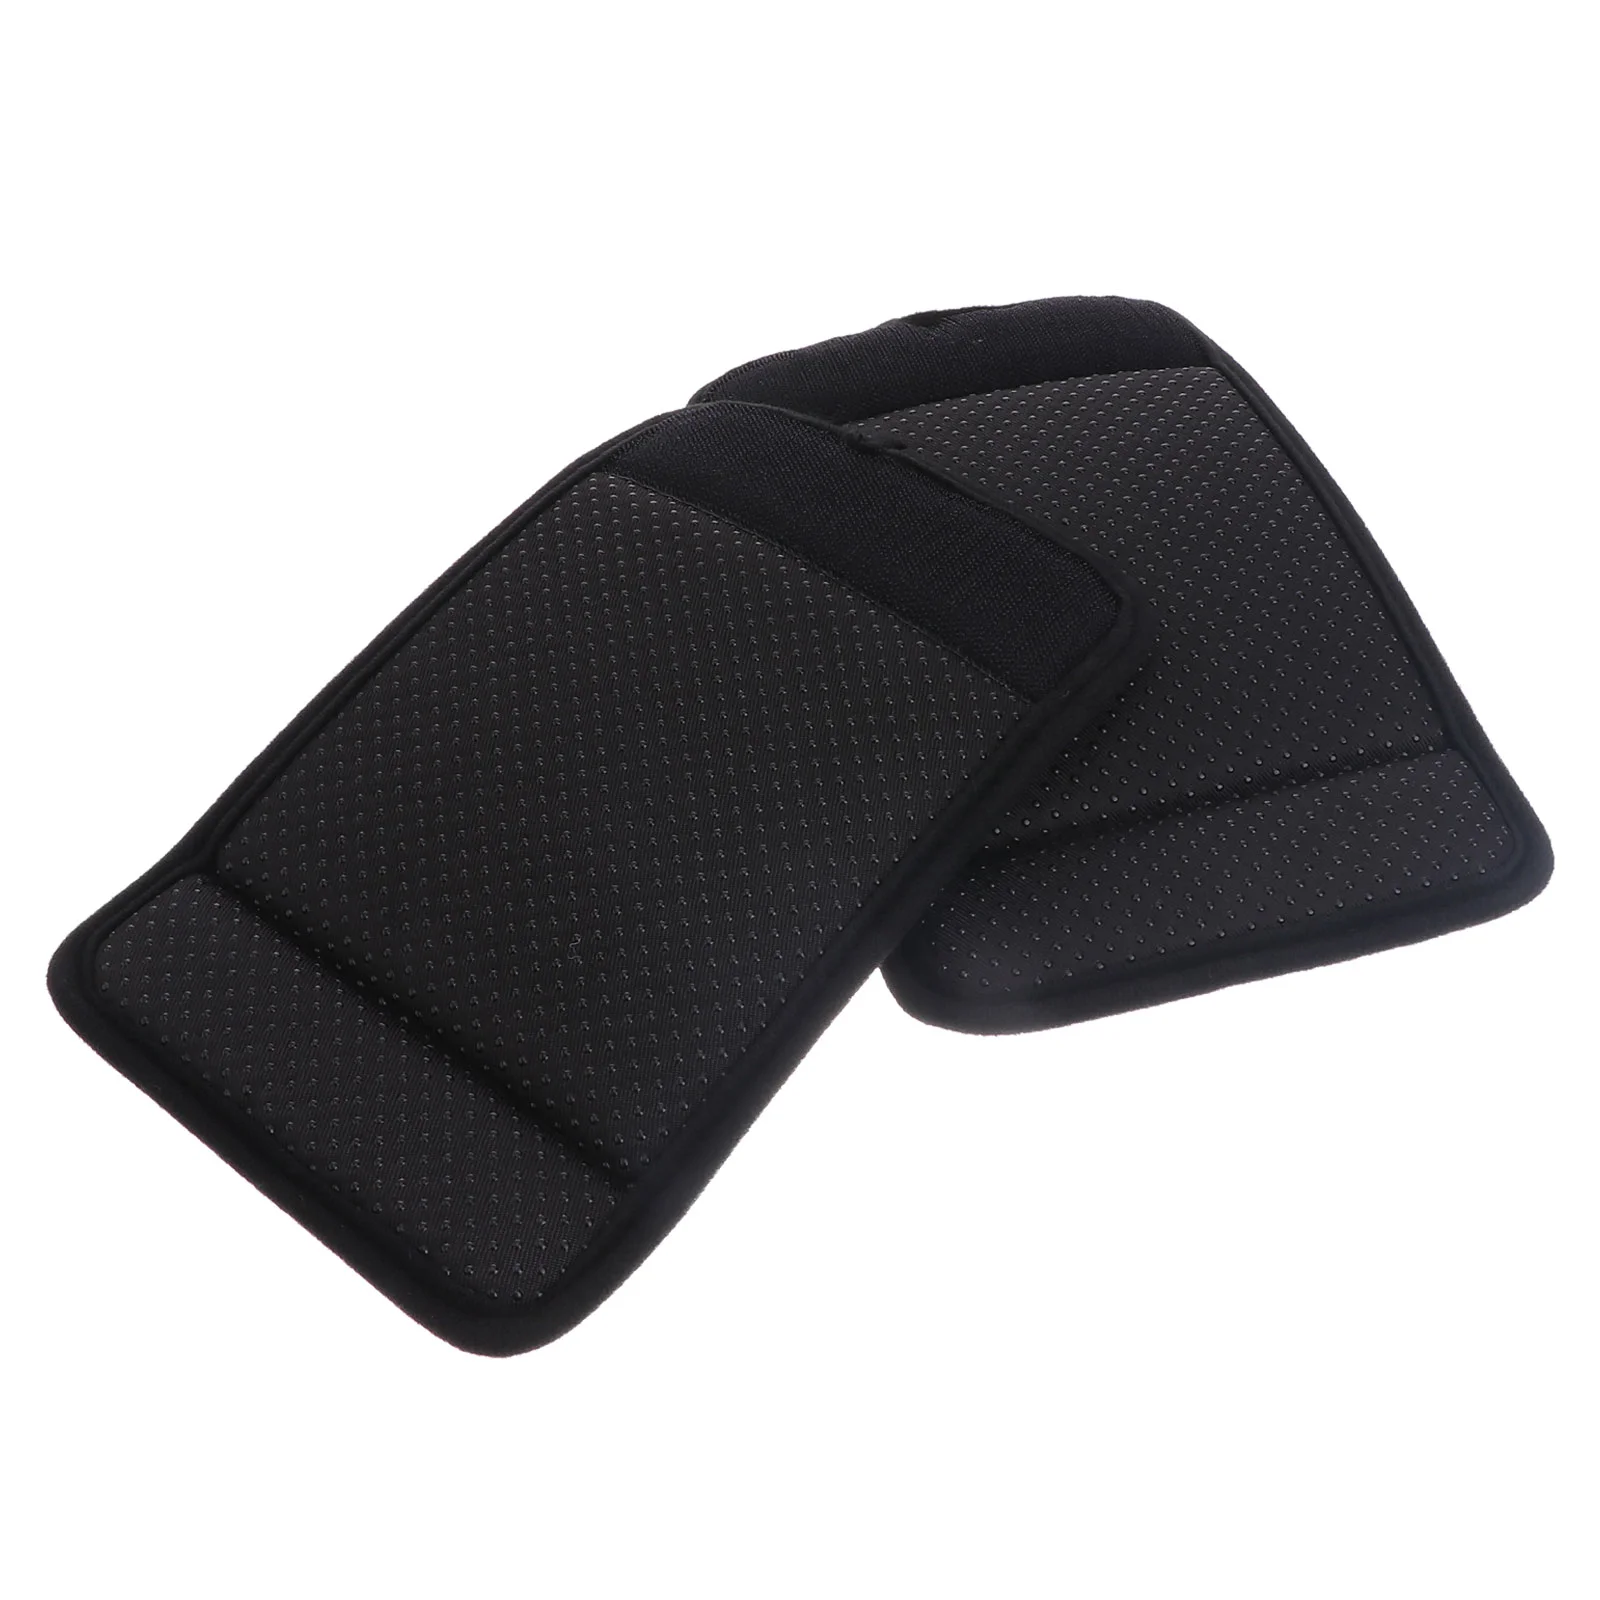 

Walker Hand Grips Wheelchair Handle Cushion Covers Armrest Pads Grip Rollator Padded Cushions Support Cover Walkers Replacement